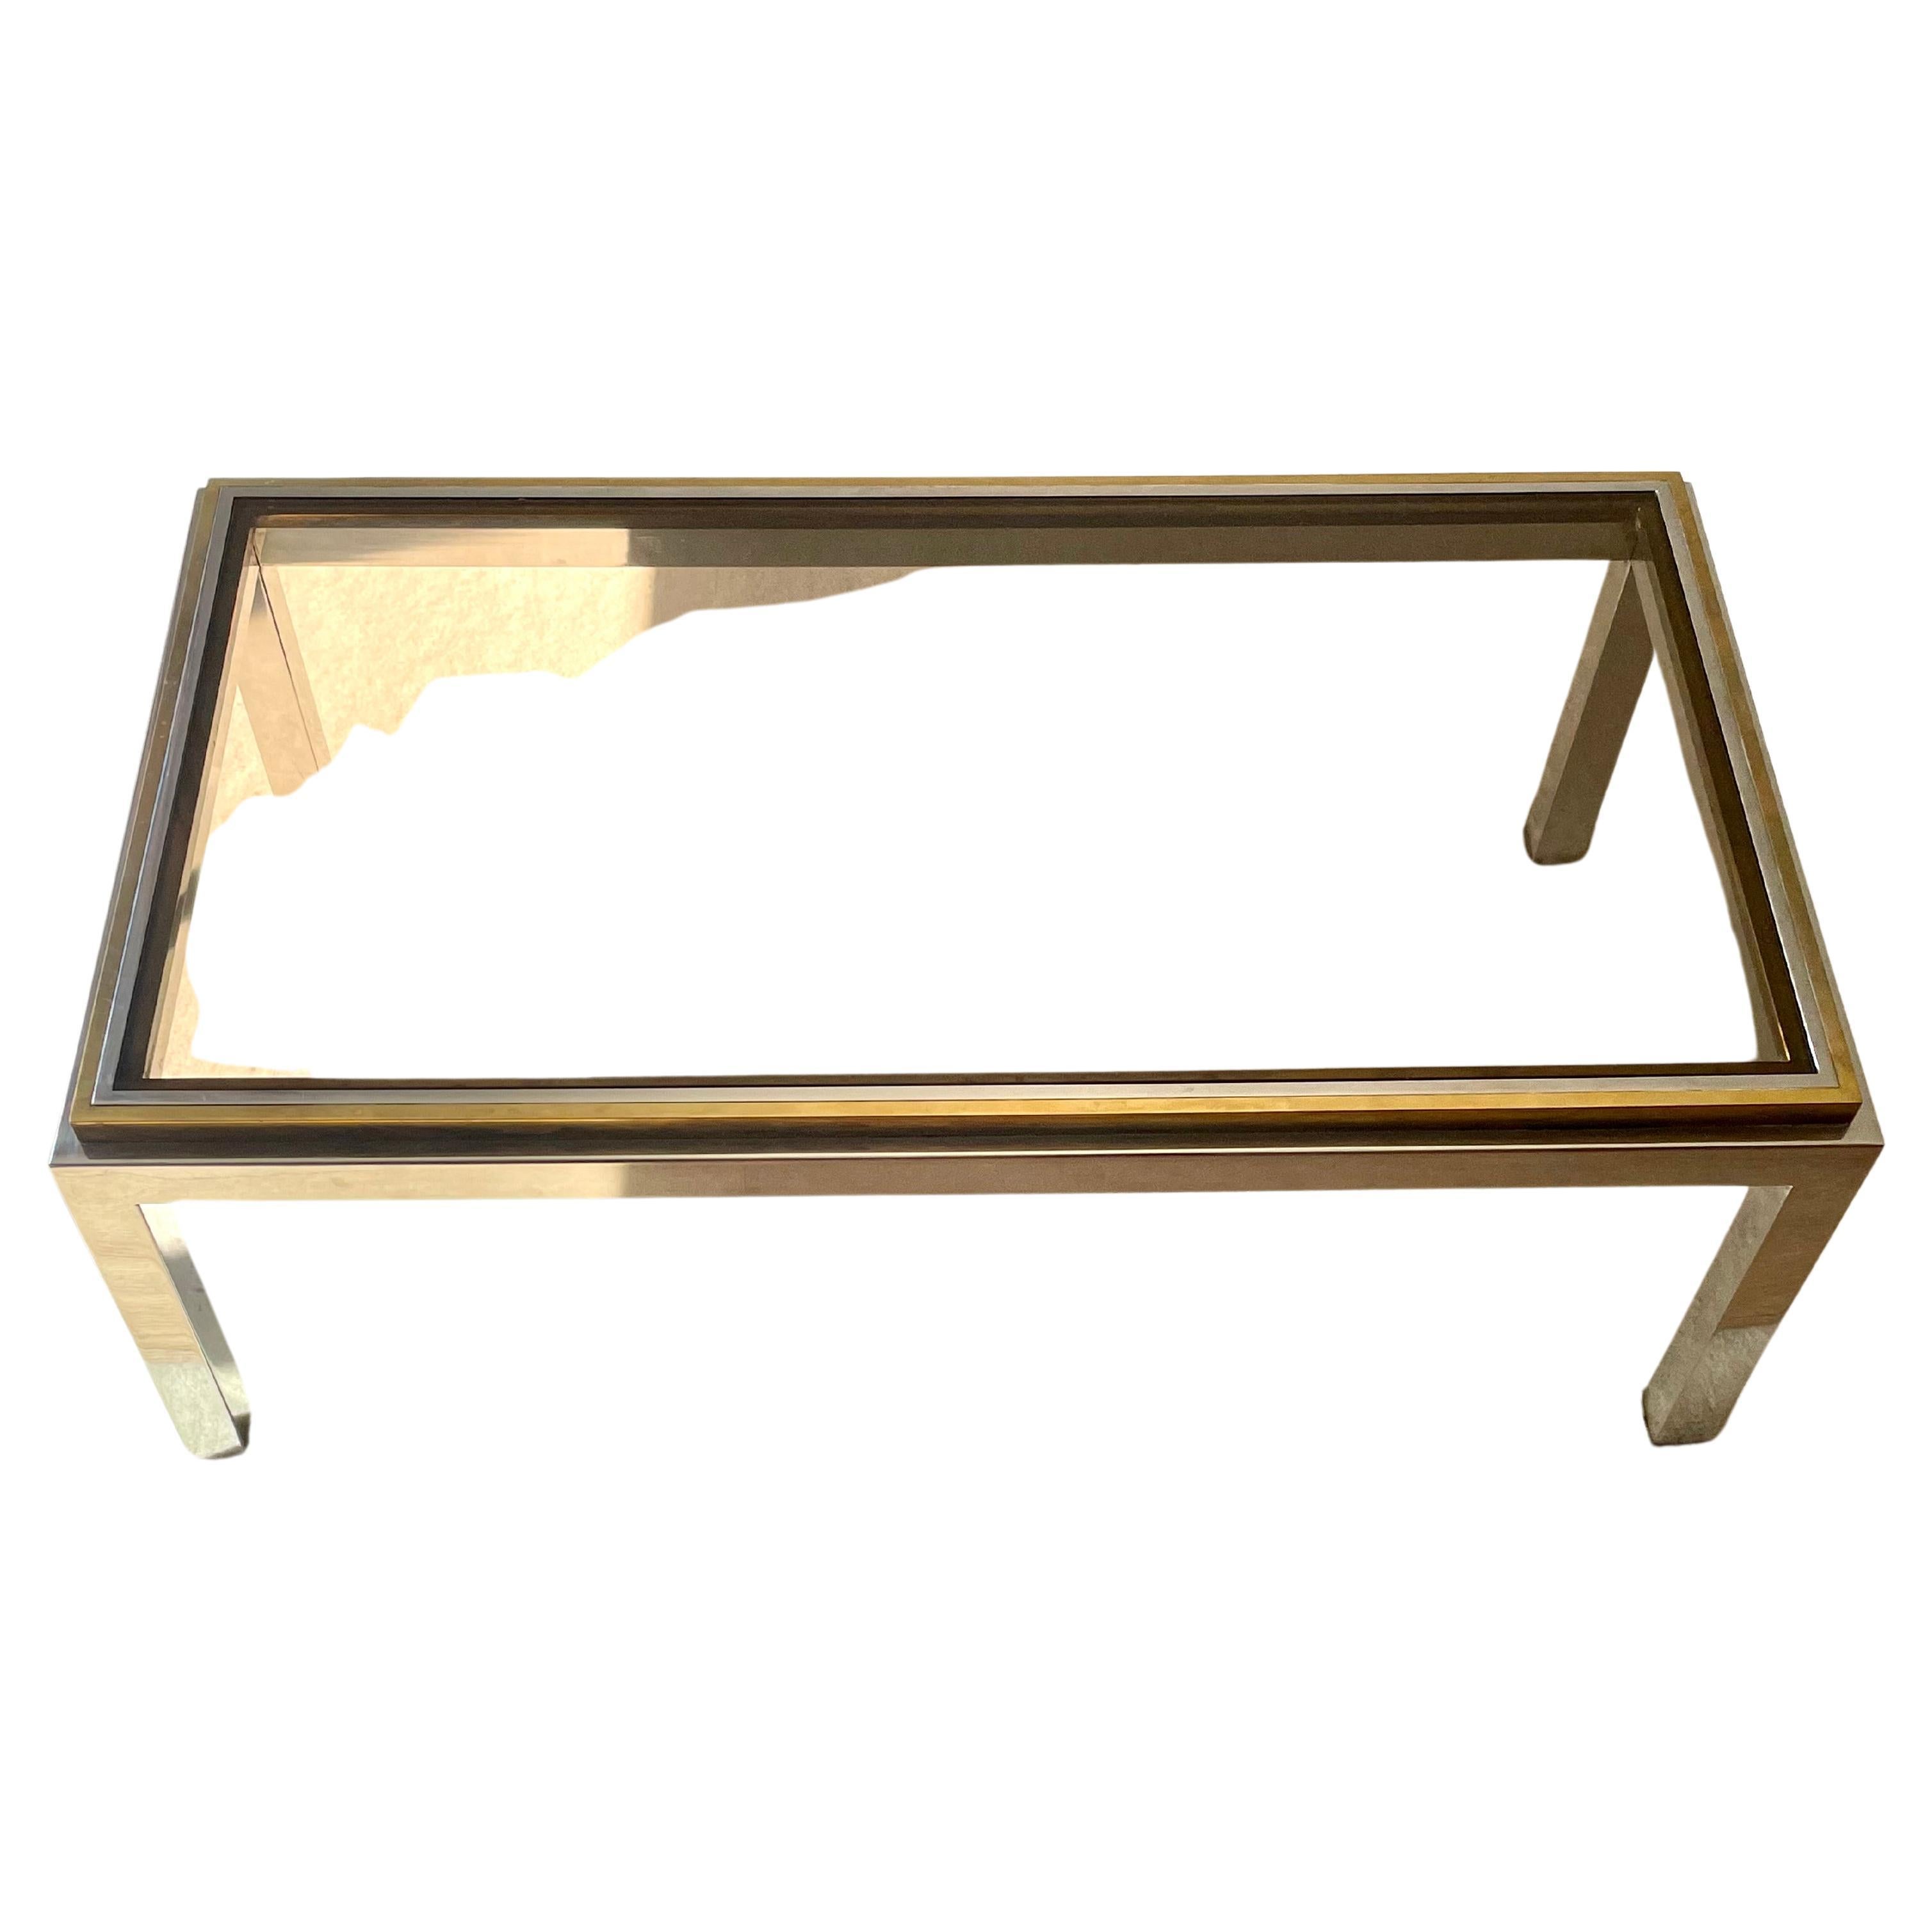 Low table by Willy Rizzo - model Flaminia -circa 1970 For Sale